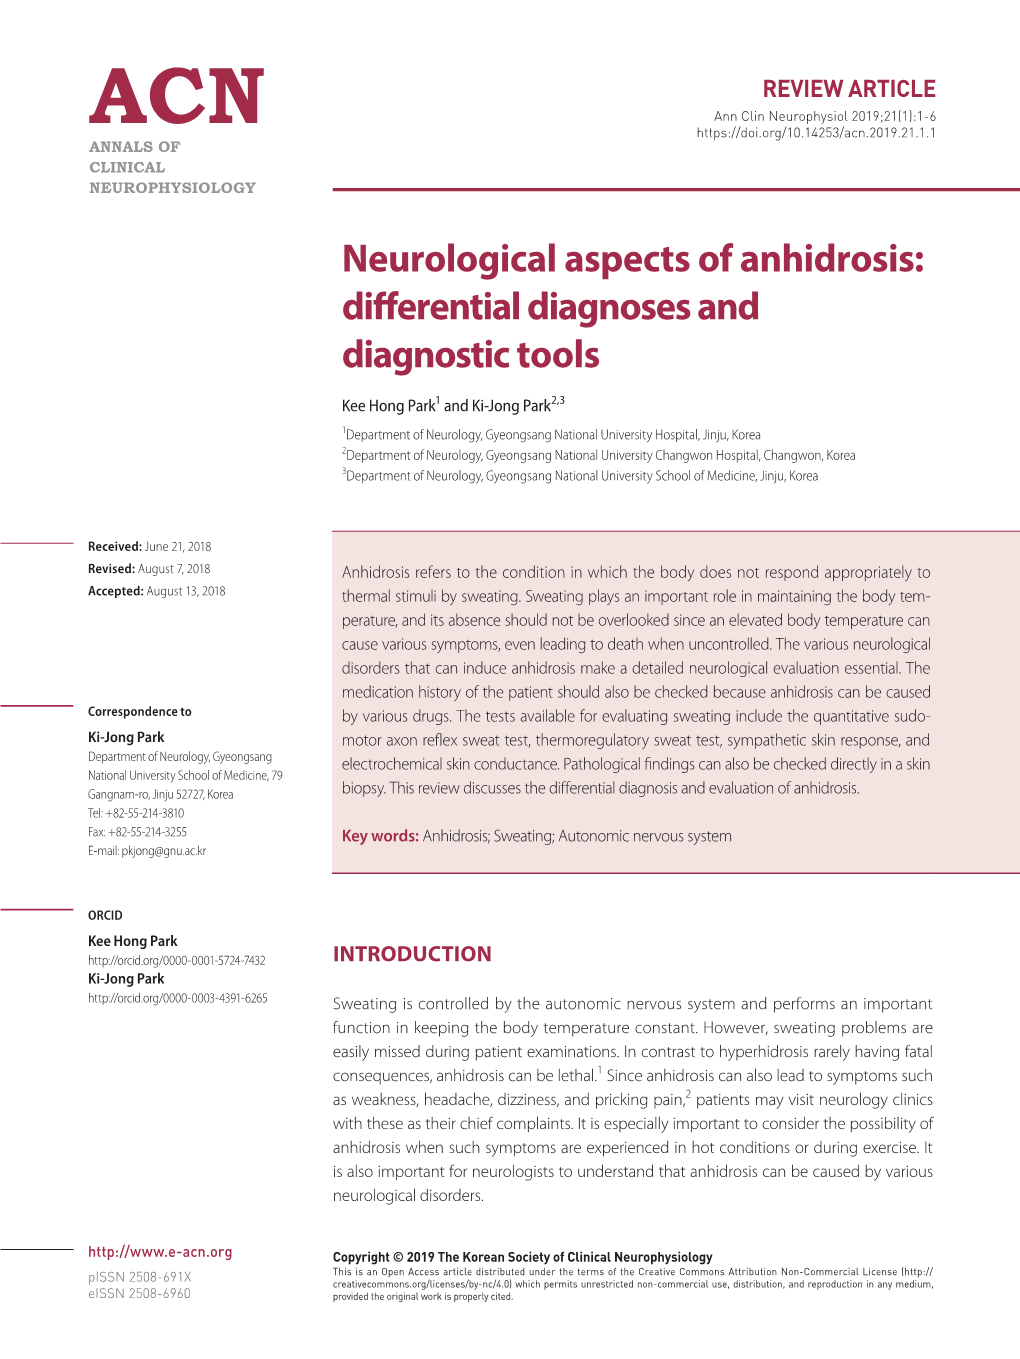 Neurological Aspects of Anhidrosis: Differential Diagnoses and Diagnostic Tools